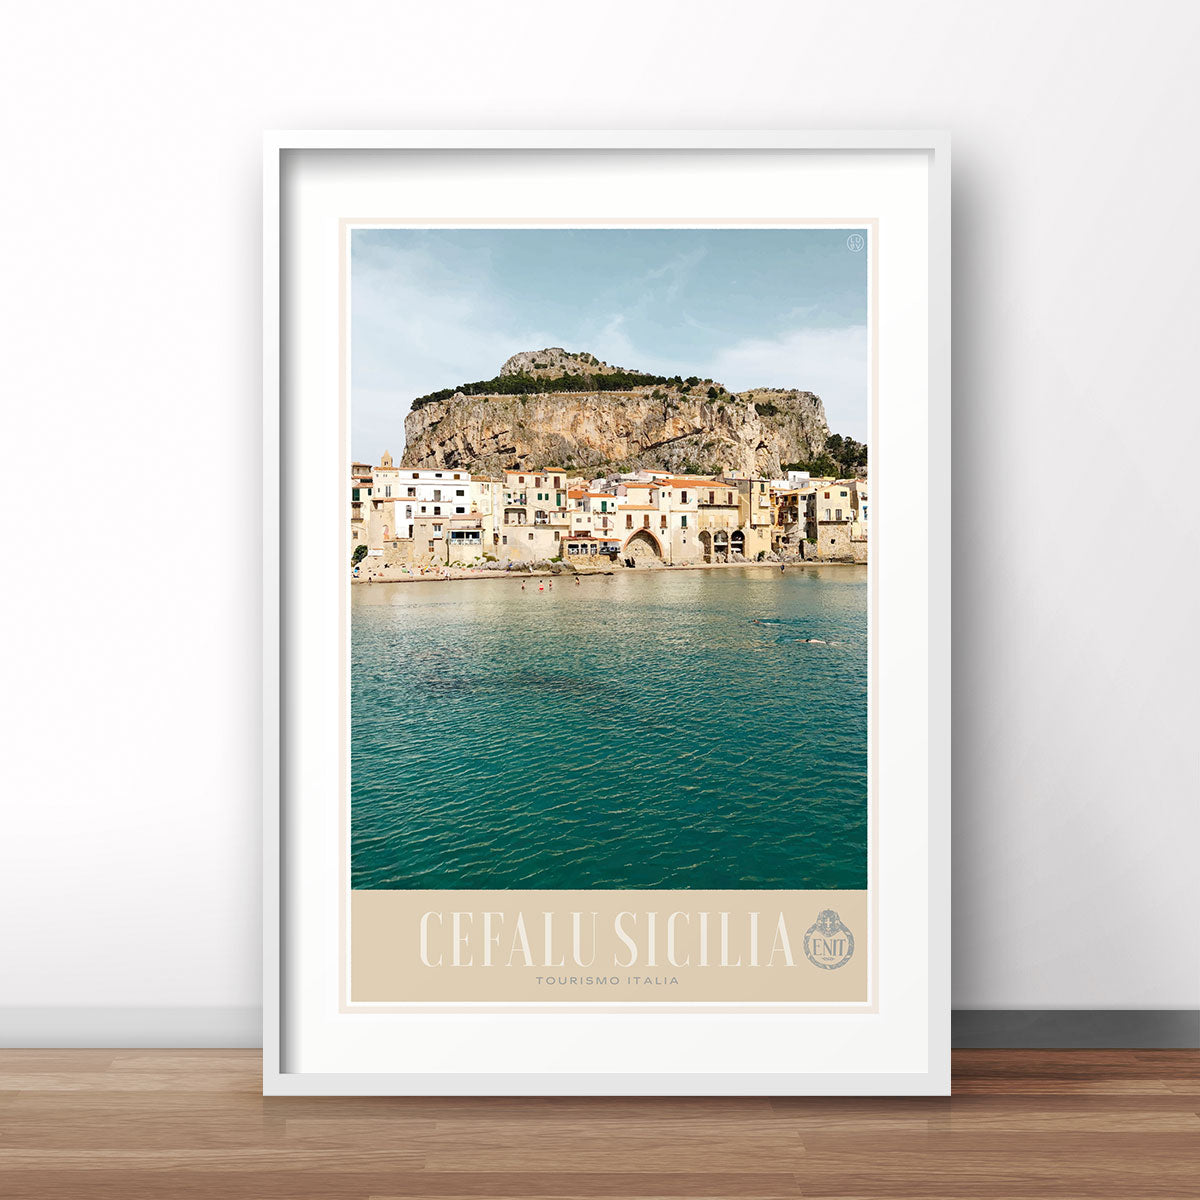 Cefalu Sicily retro vintage poster print from Places We Luv